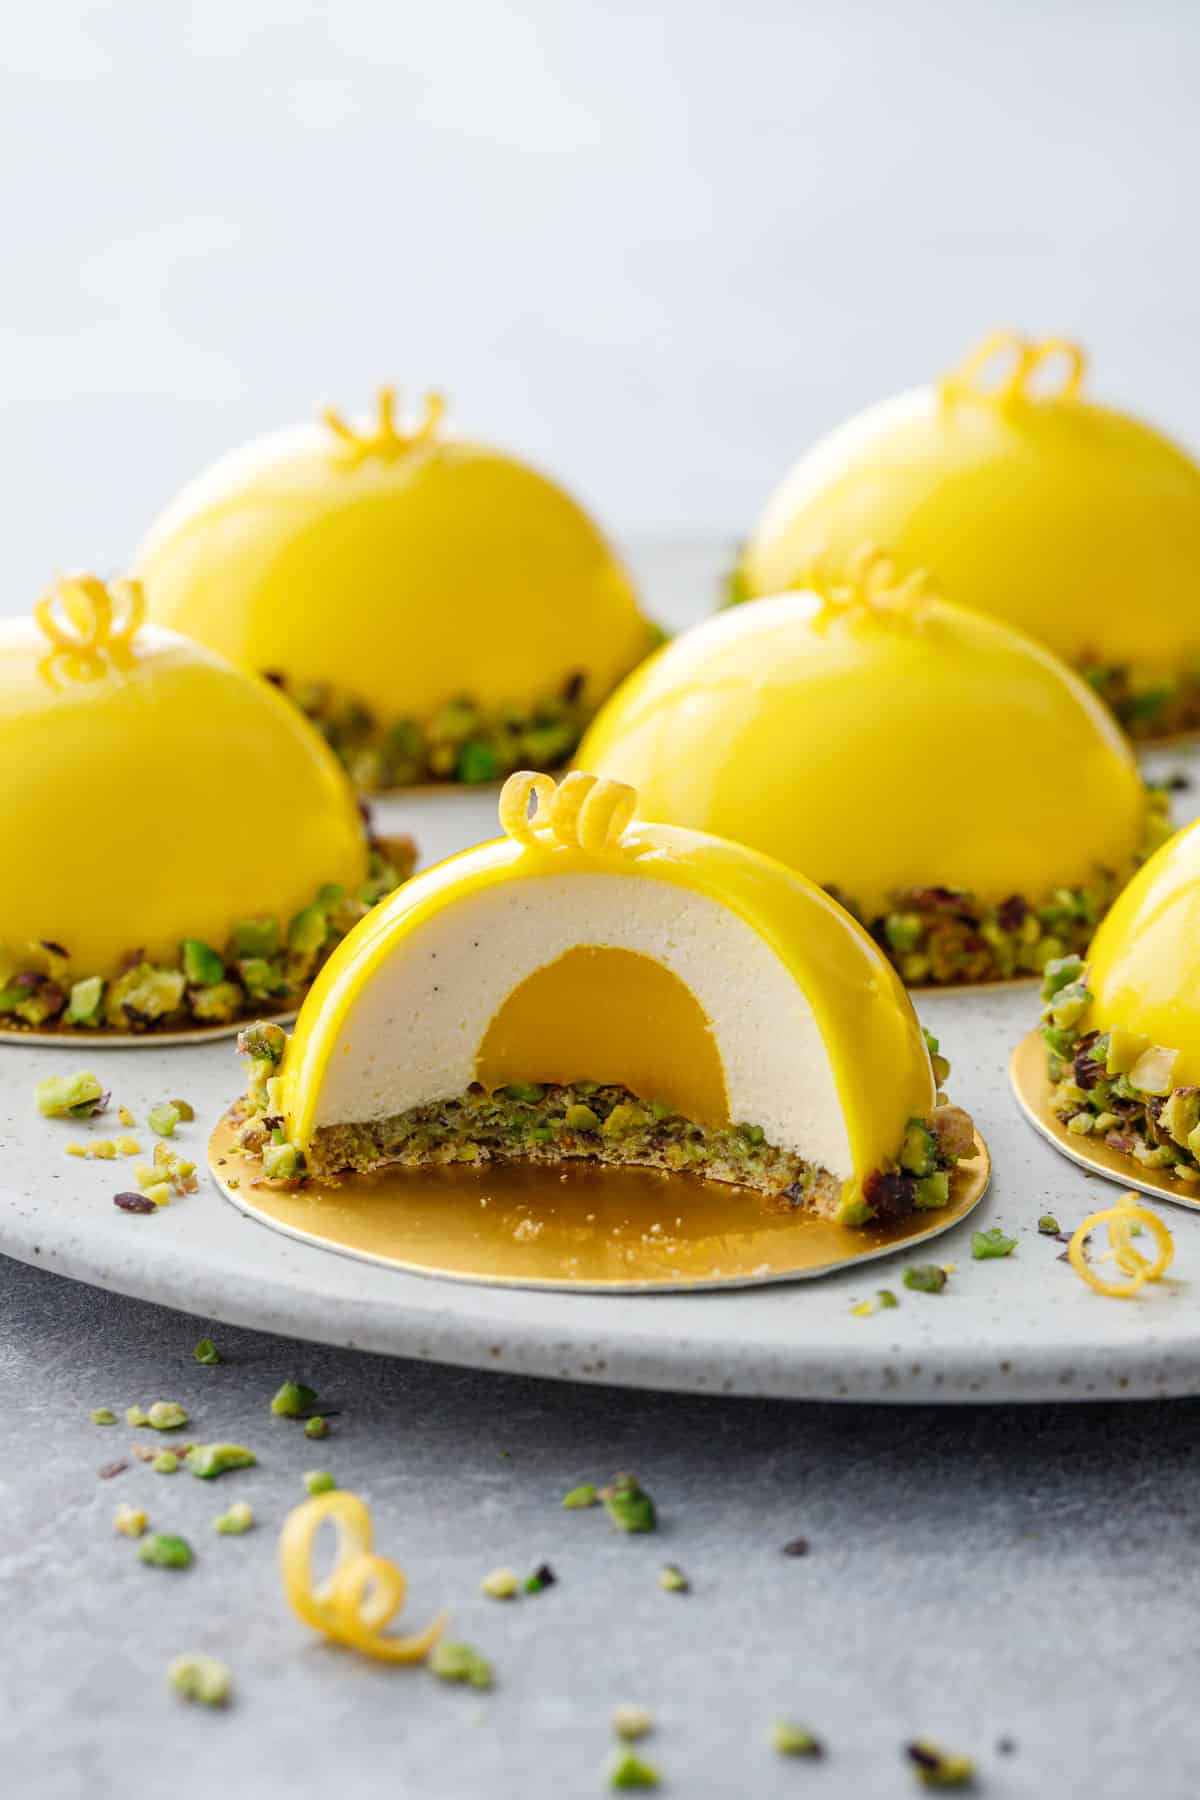 Plate with Pistachio & Meyer Lemon Mousse Cakes with bright yellow mirror glaze, cross section of one cake showing layers inside.